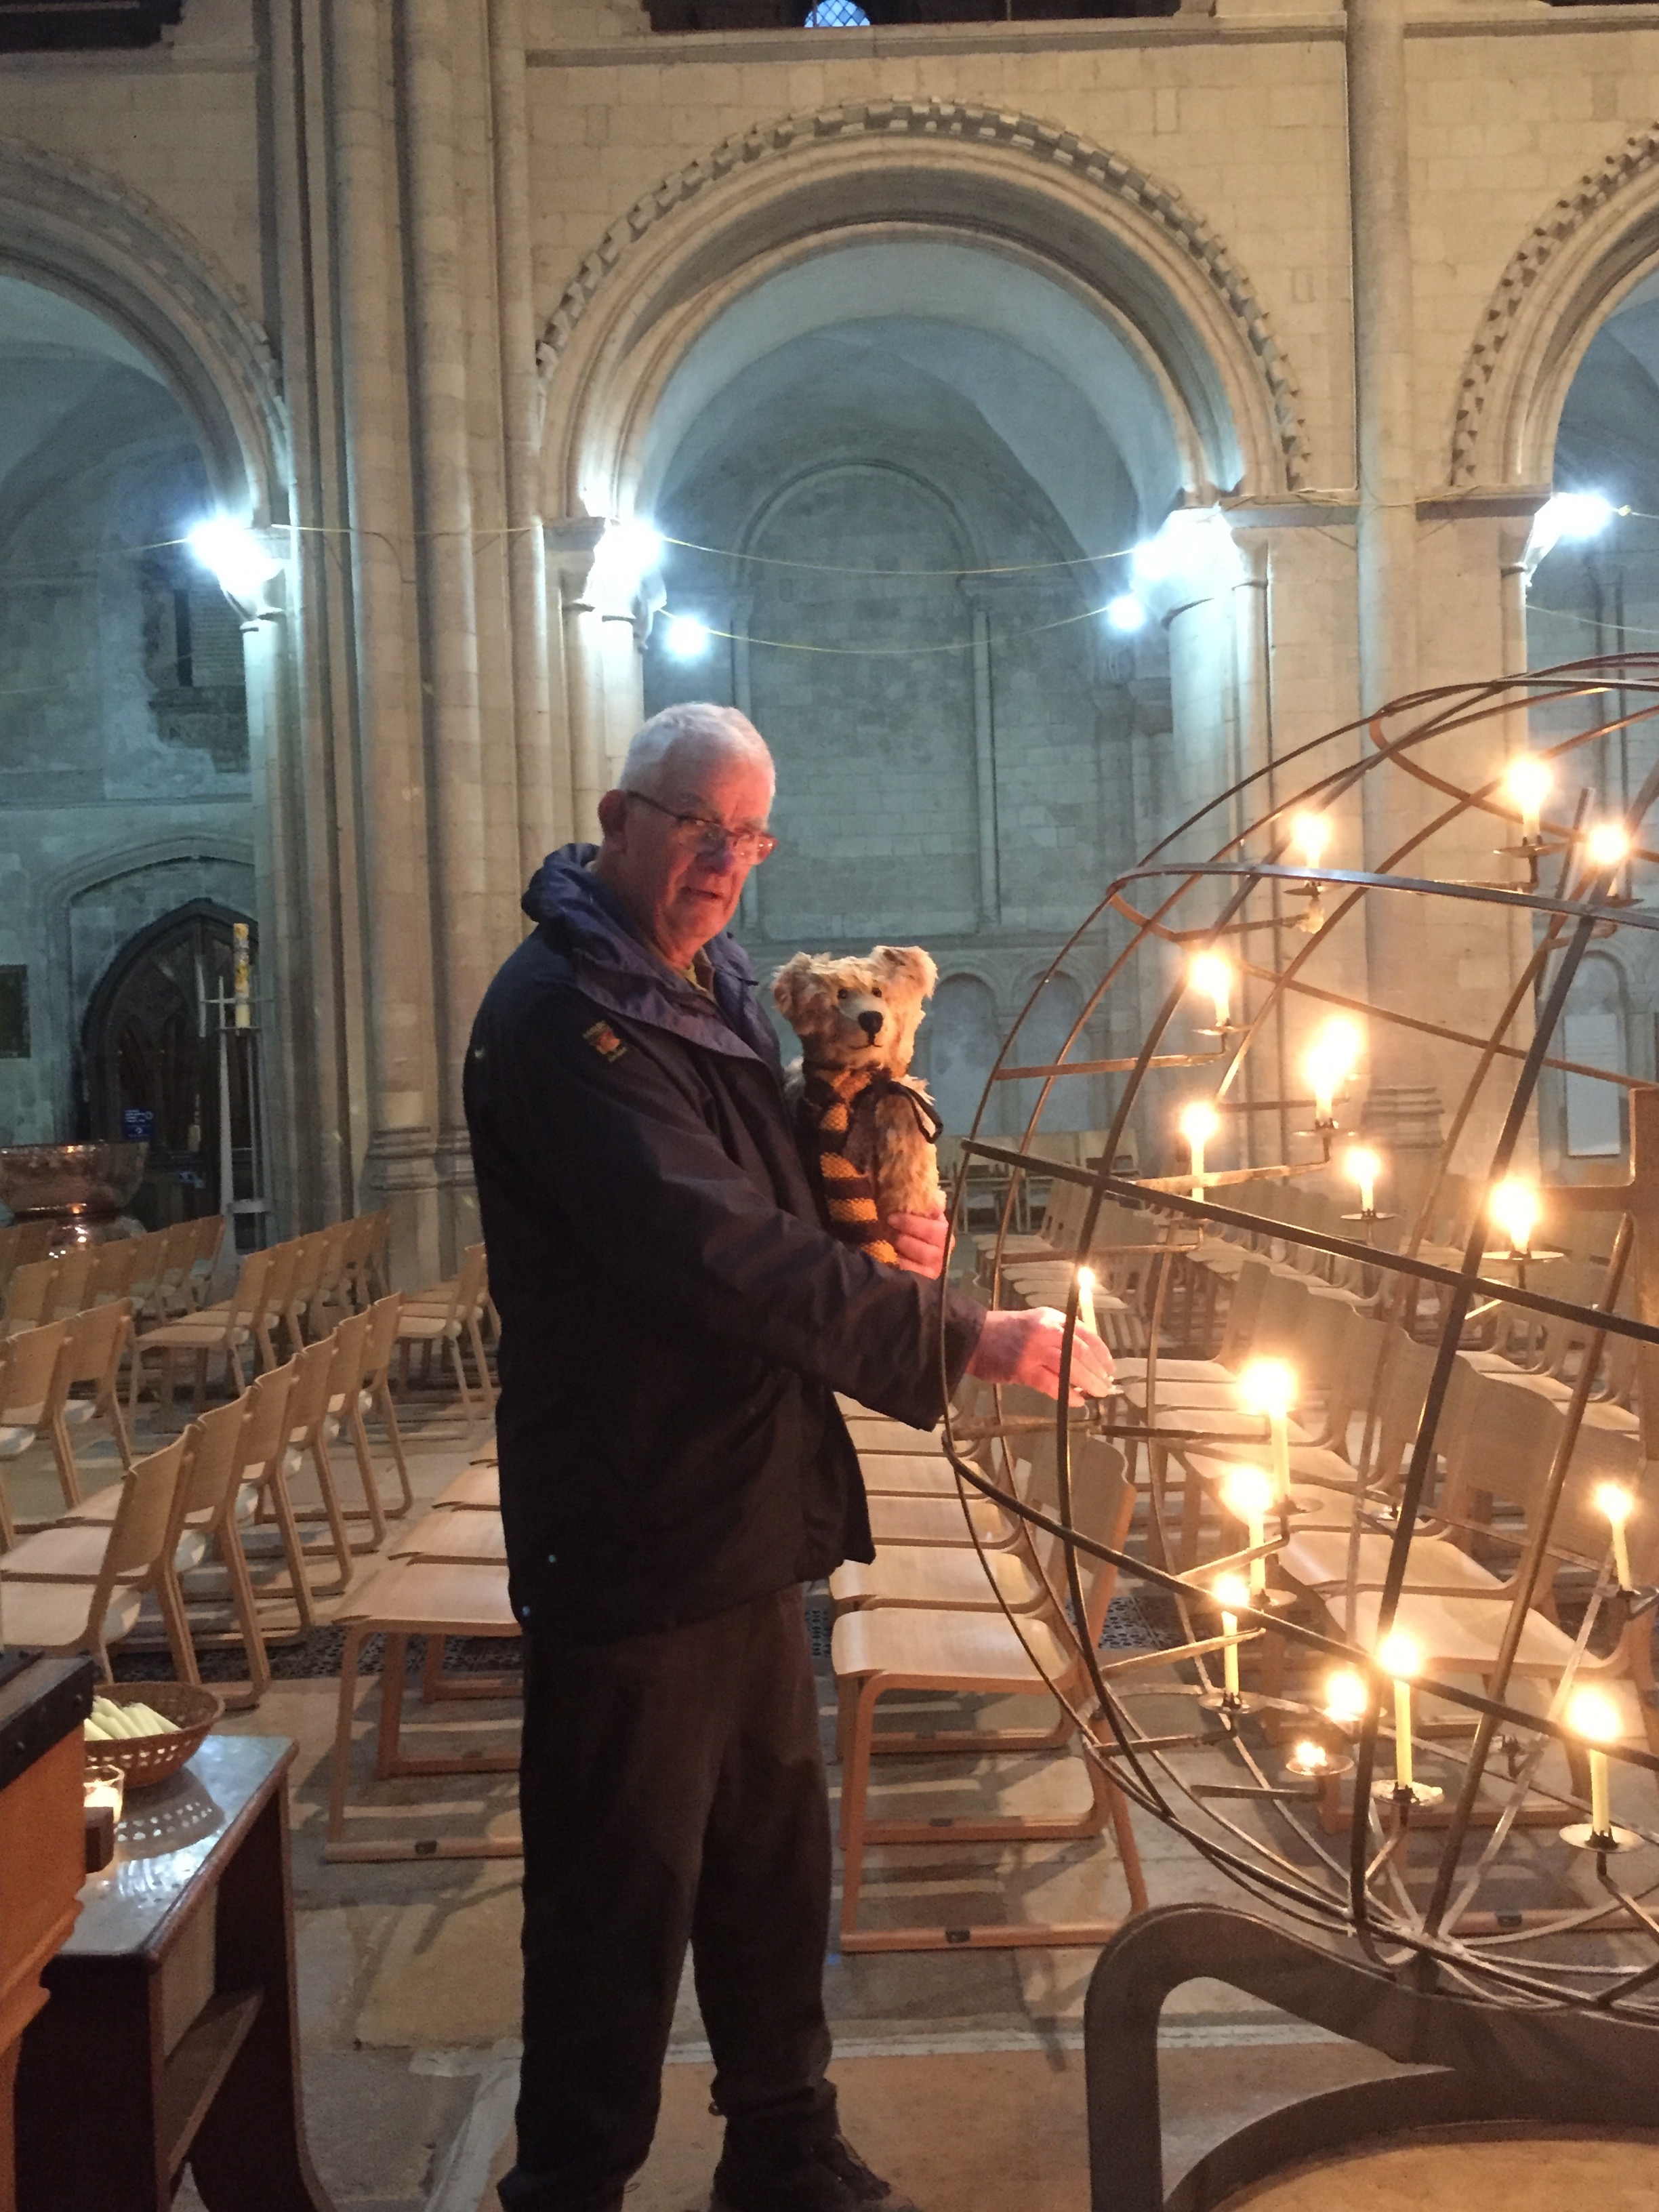 Suffolk: Lighting a Candle for Diddley. We also lit a candle for Diddley in Norwich Cathedral the previous day.